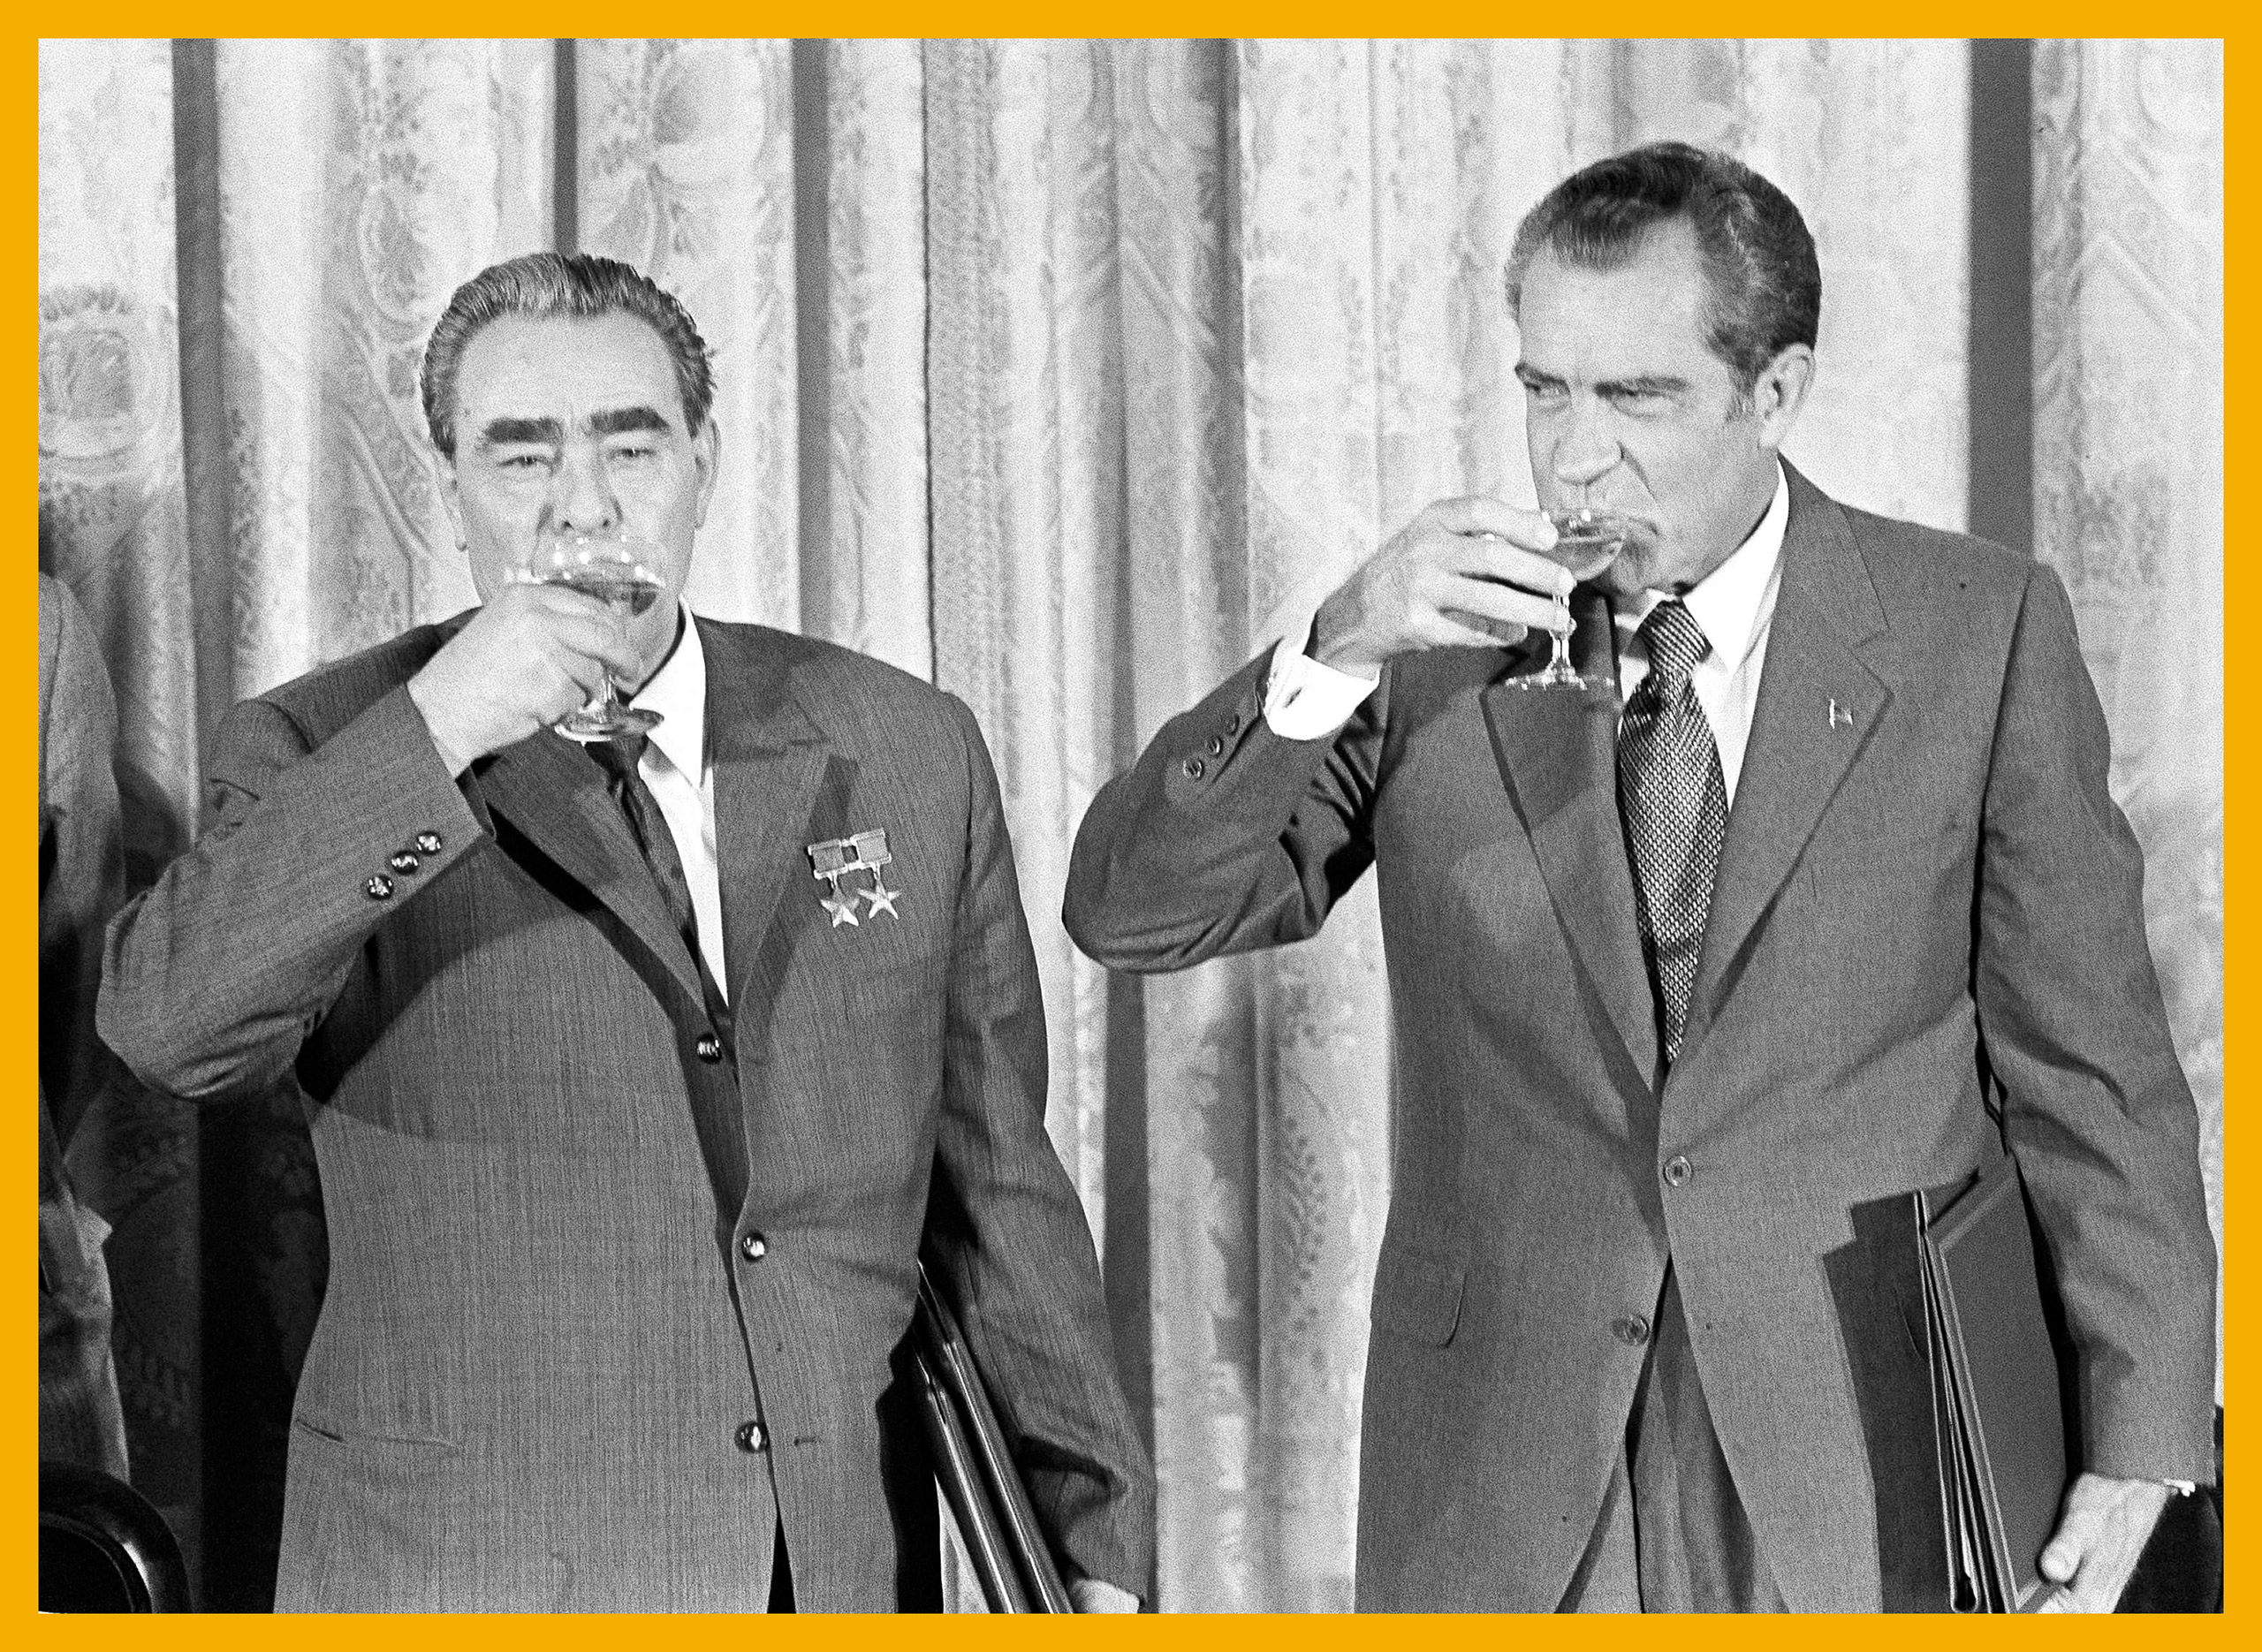 President Richard M. Nixon, right, and Soviet leader Leonid Brezhnev drink a toast at the White House in Washington, June 21, 1973. The toast comes after the two leaders signed a pact to limit offensive nuclear arsenals. (AP Photo)